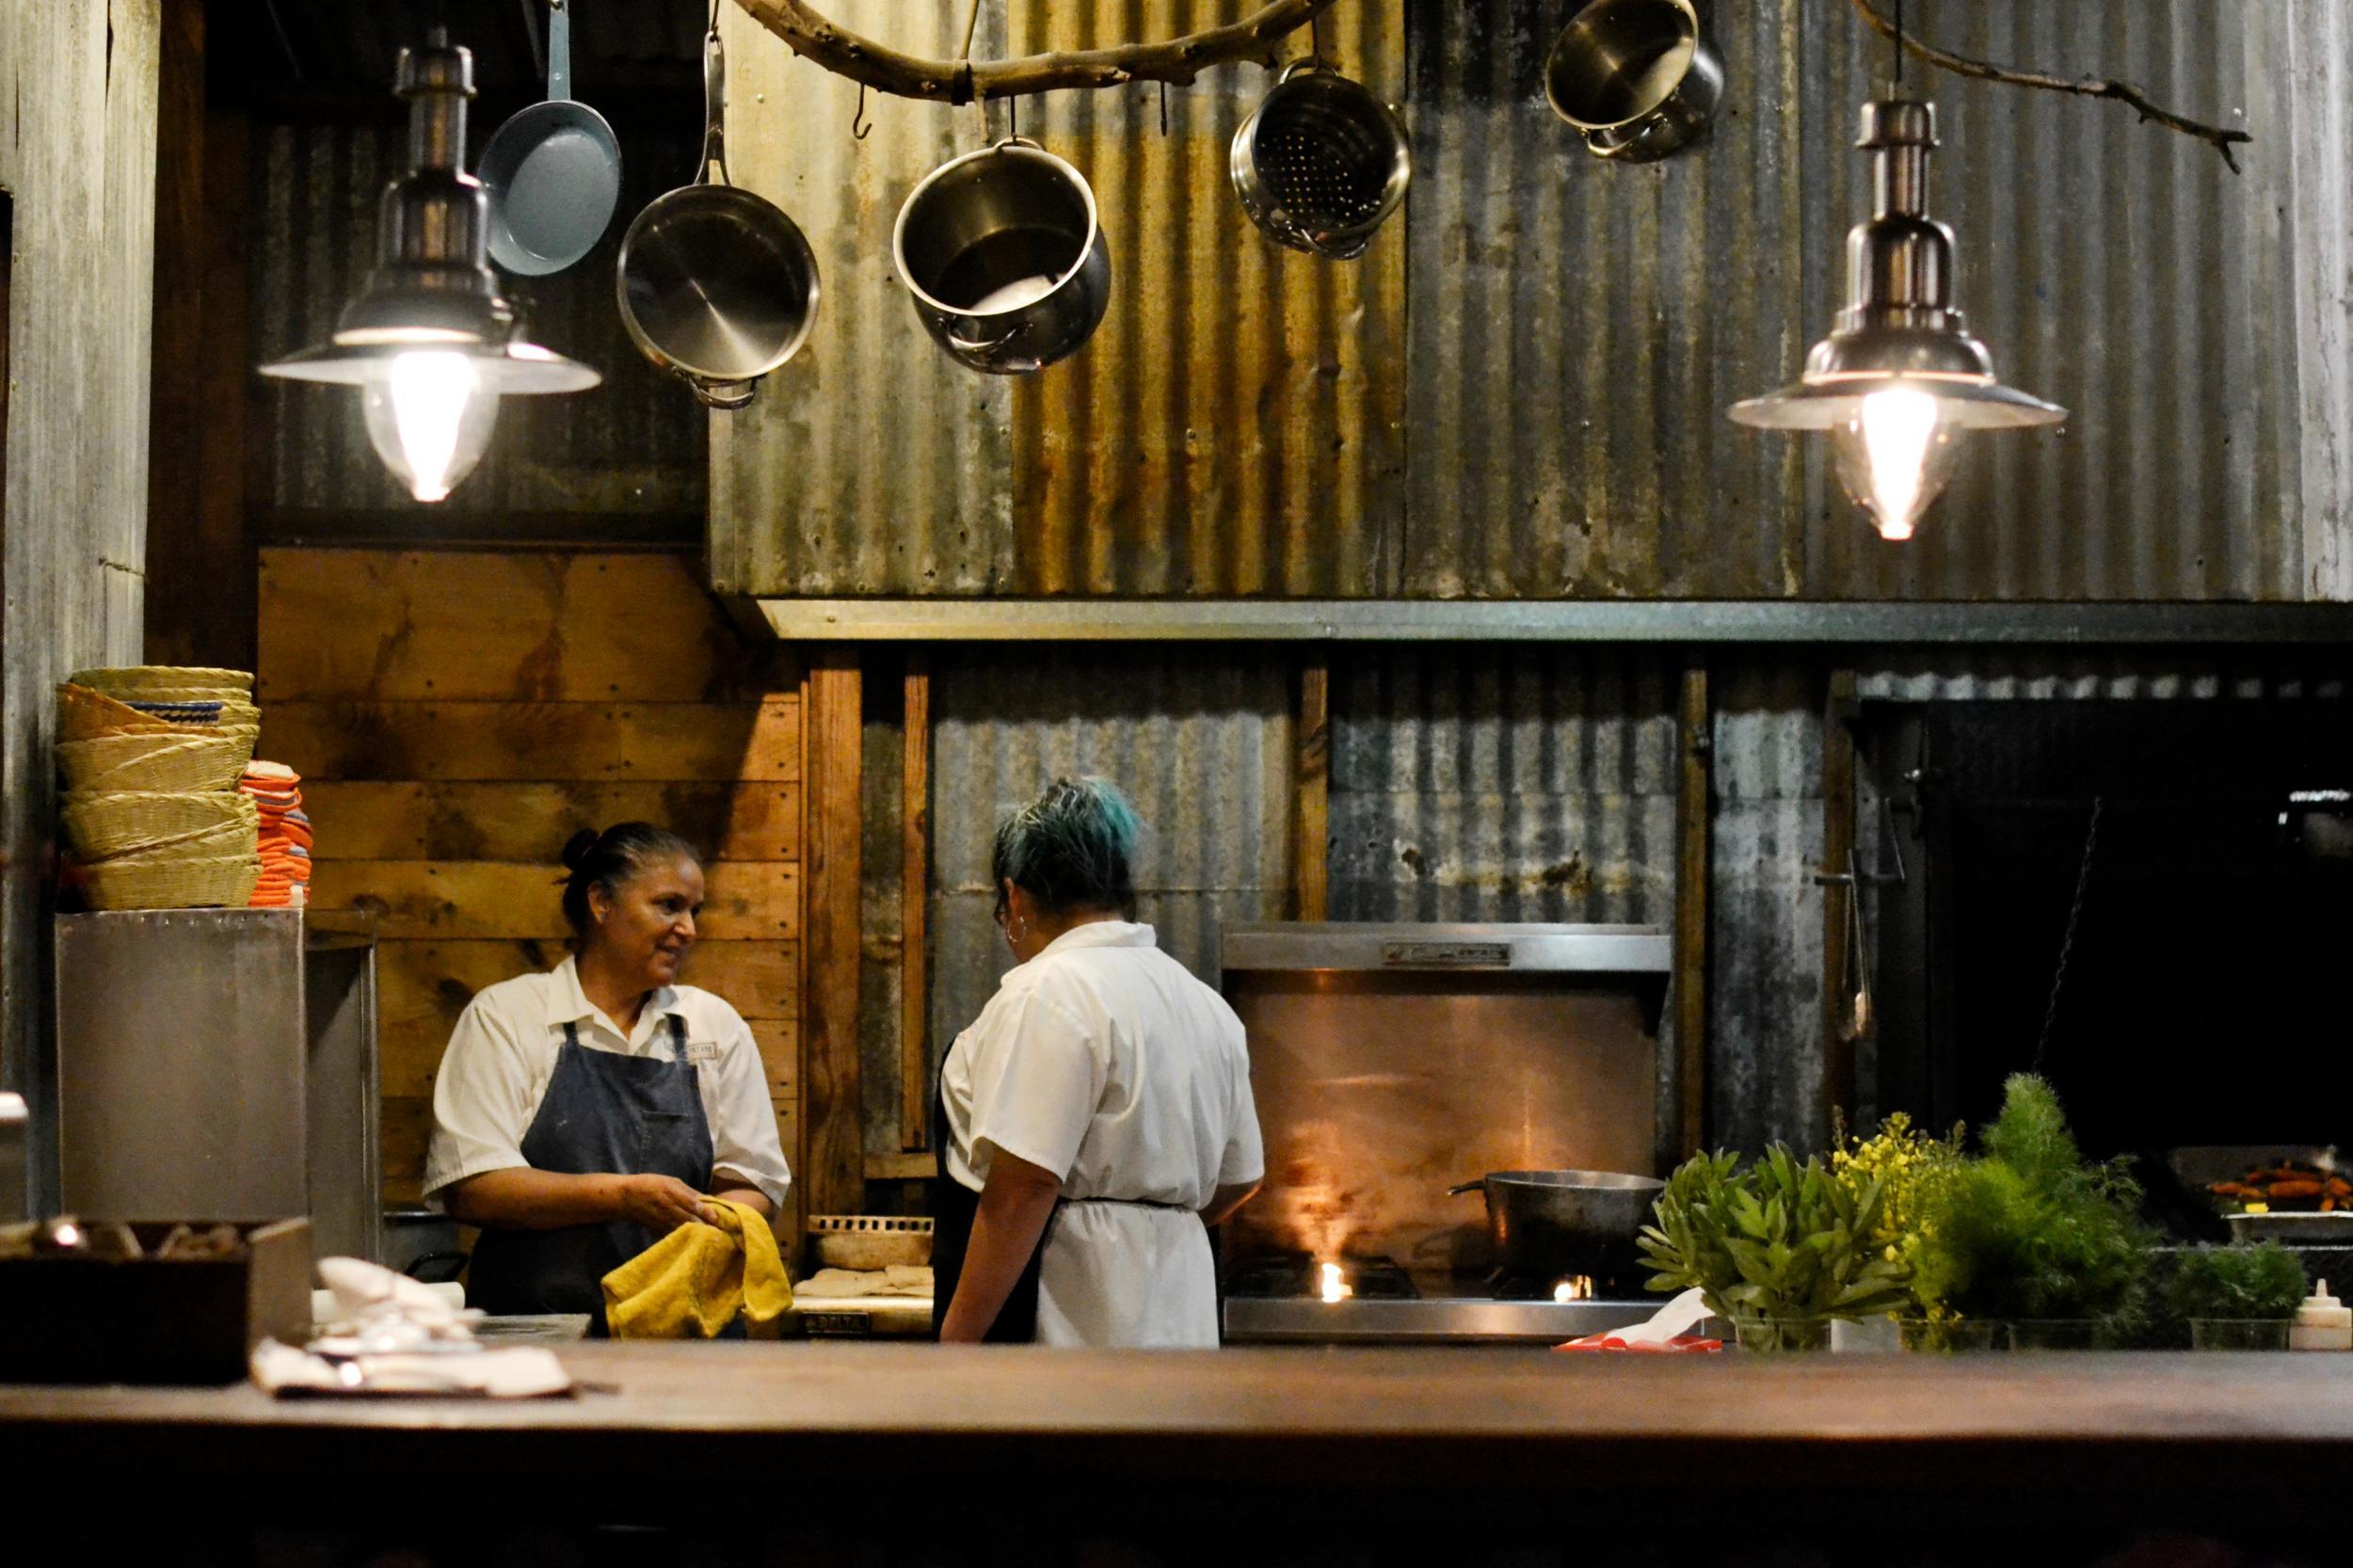 The open kitchen at Finca